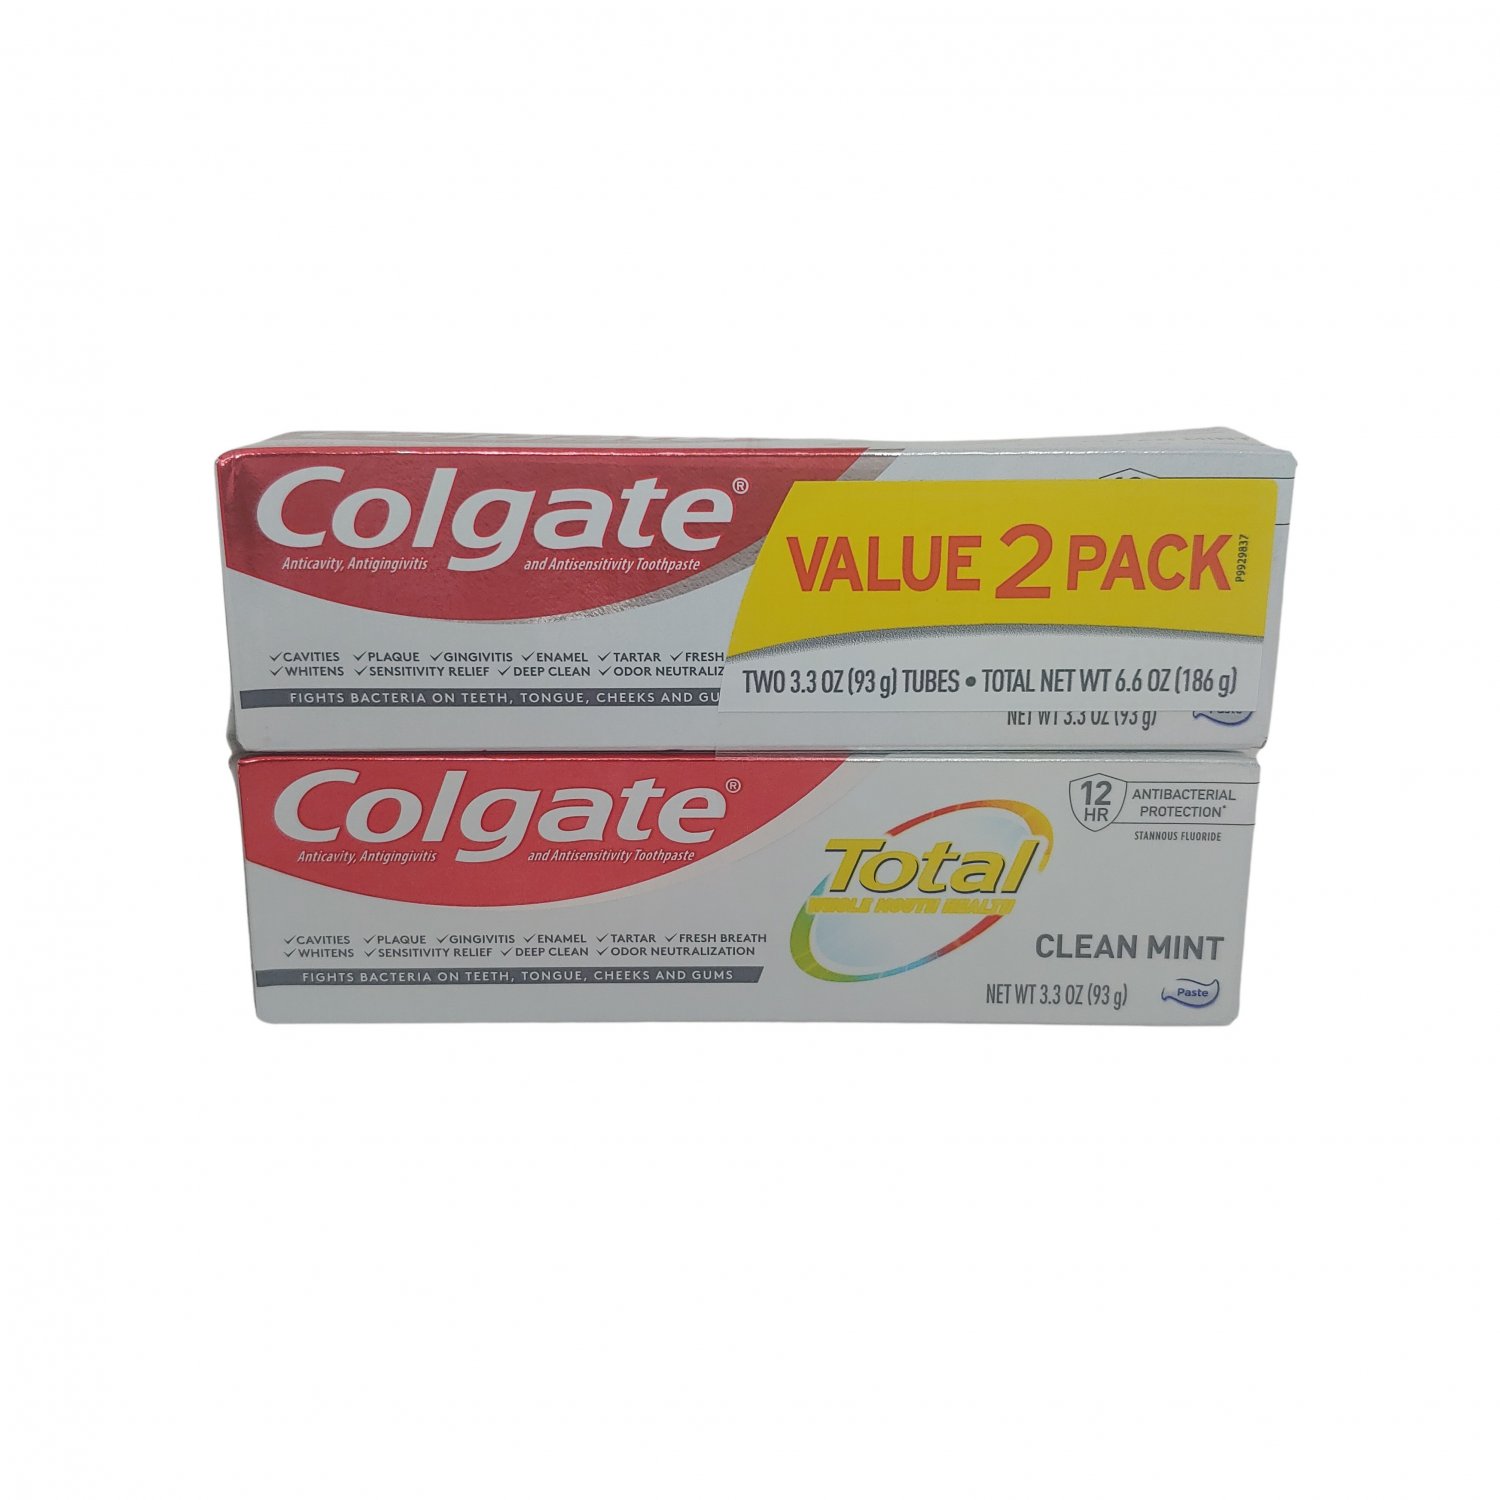 Colgate Total Whole Mouth Health Toothpaste, Clean Mint Paste, 3.3 oz (93 g) 2-Pack, Exp 06/2023